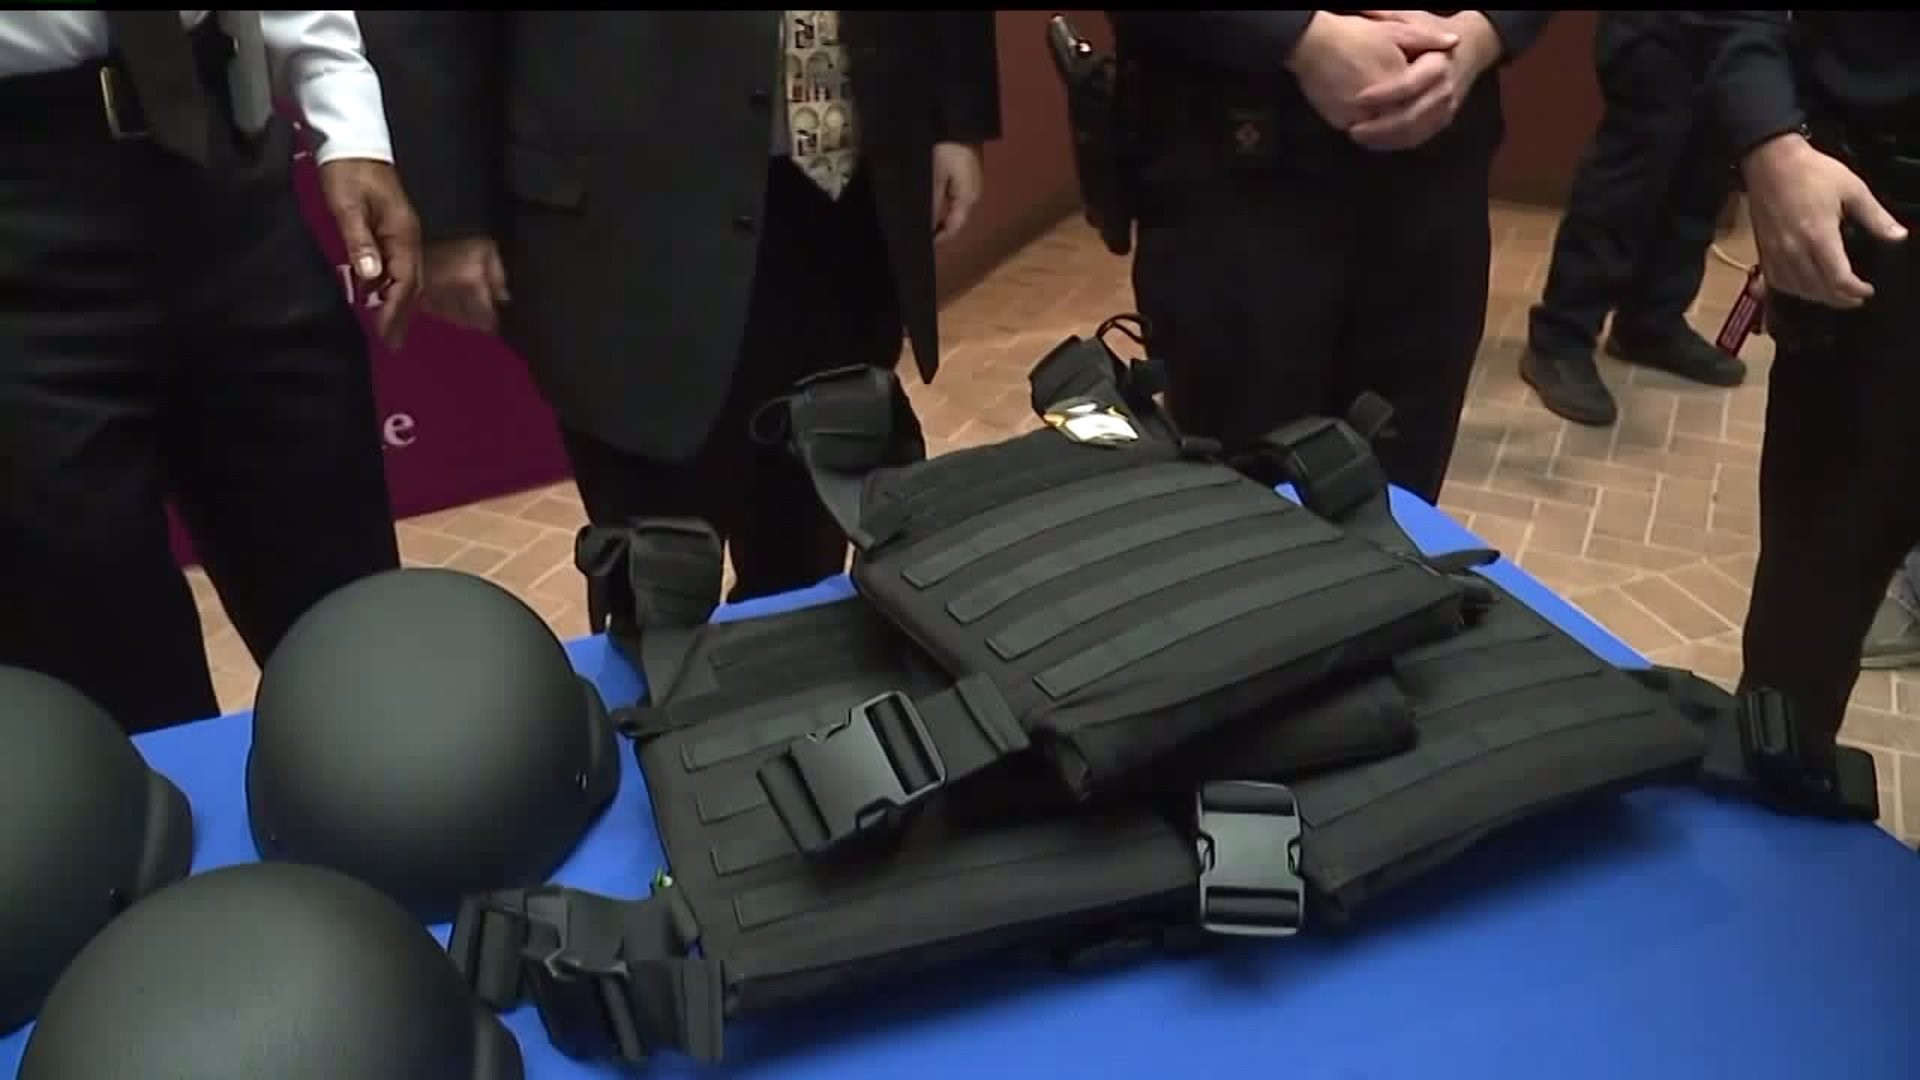 Ballistic vests and helmets donated to Harrisburg Police Department